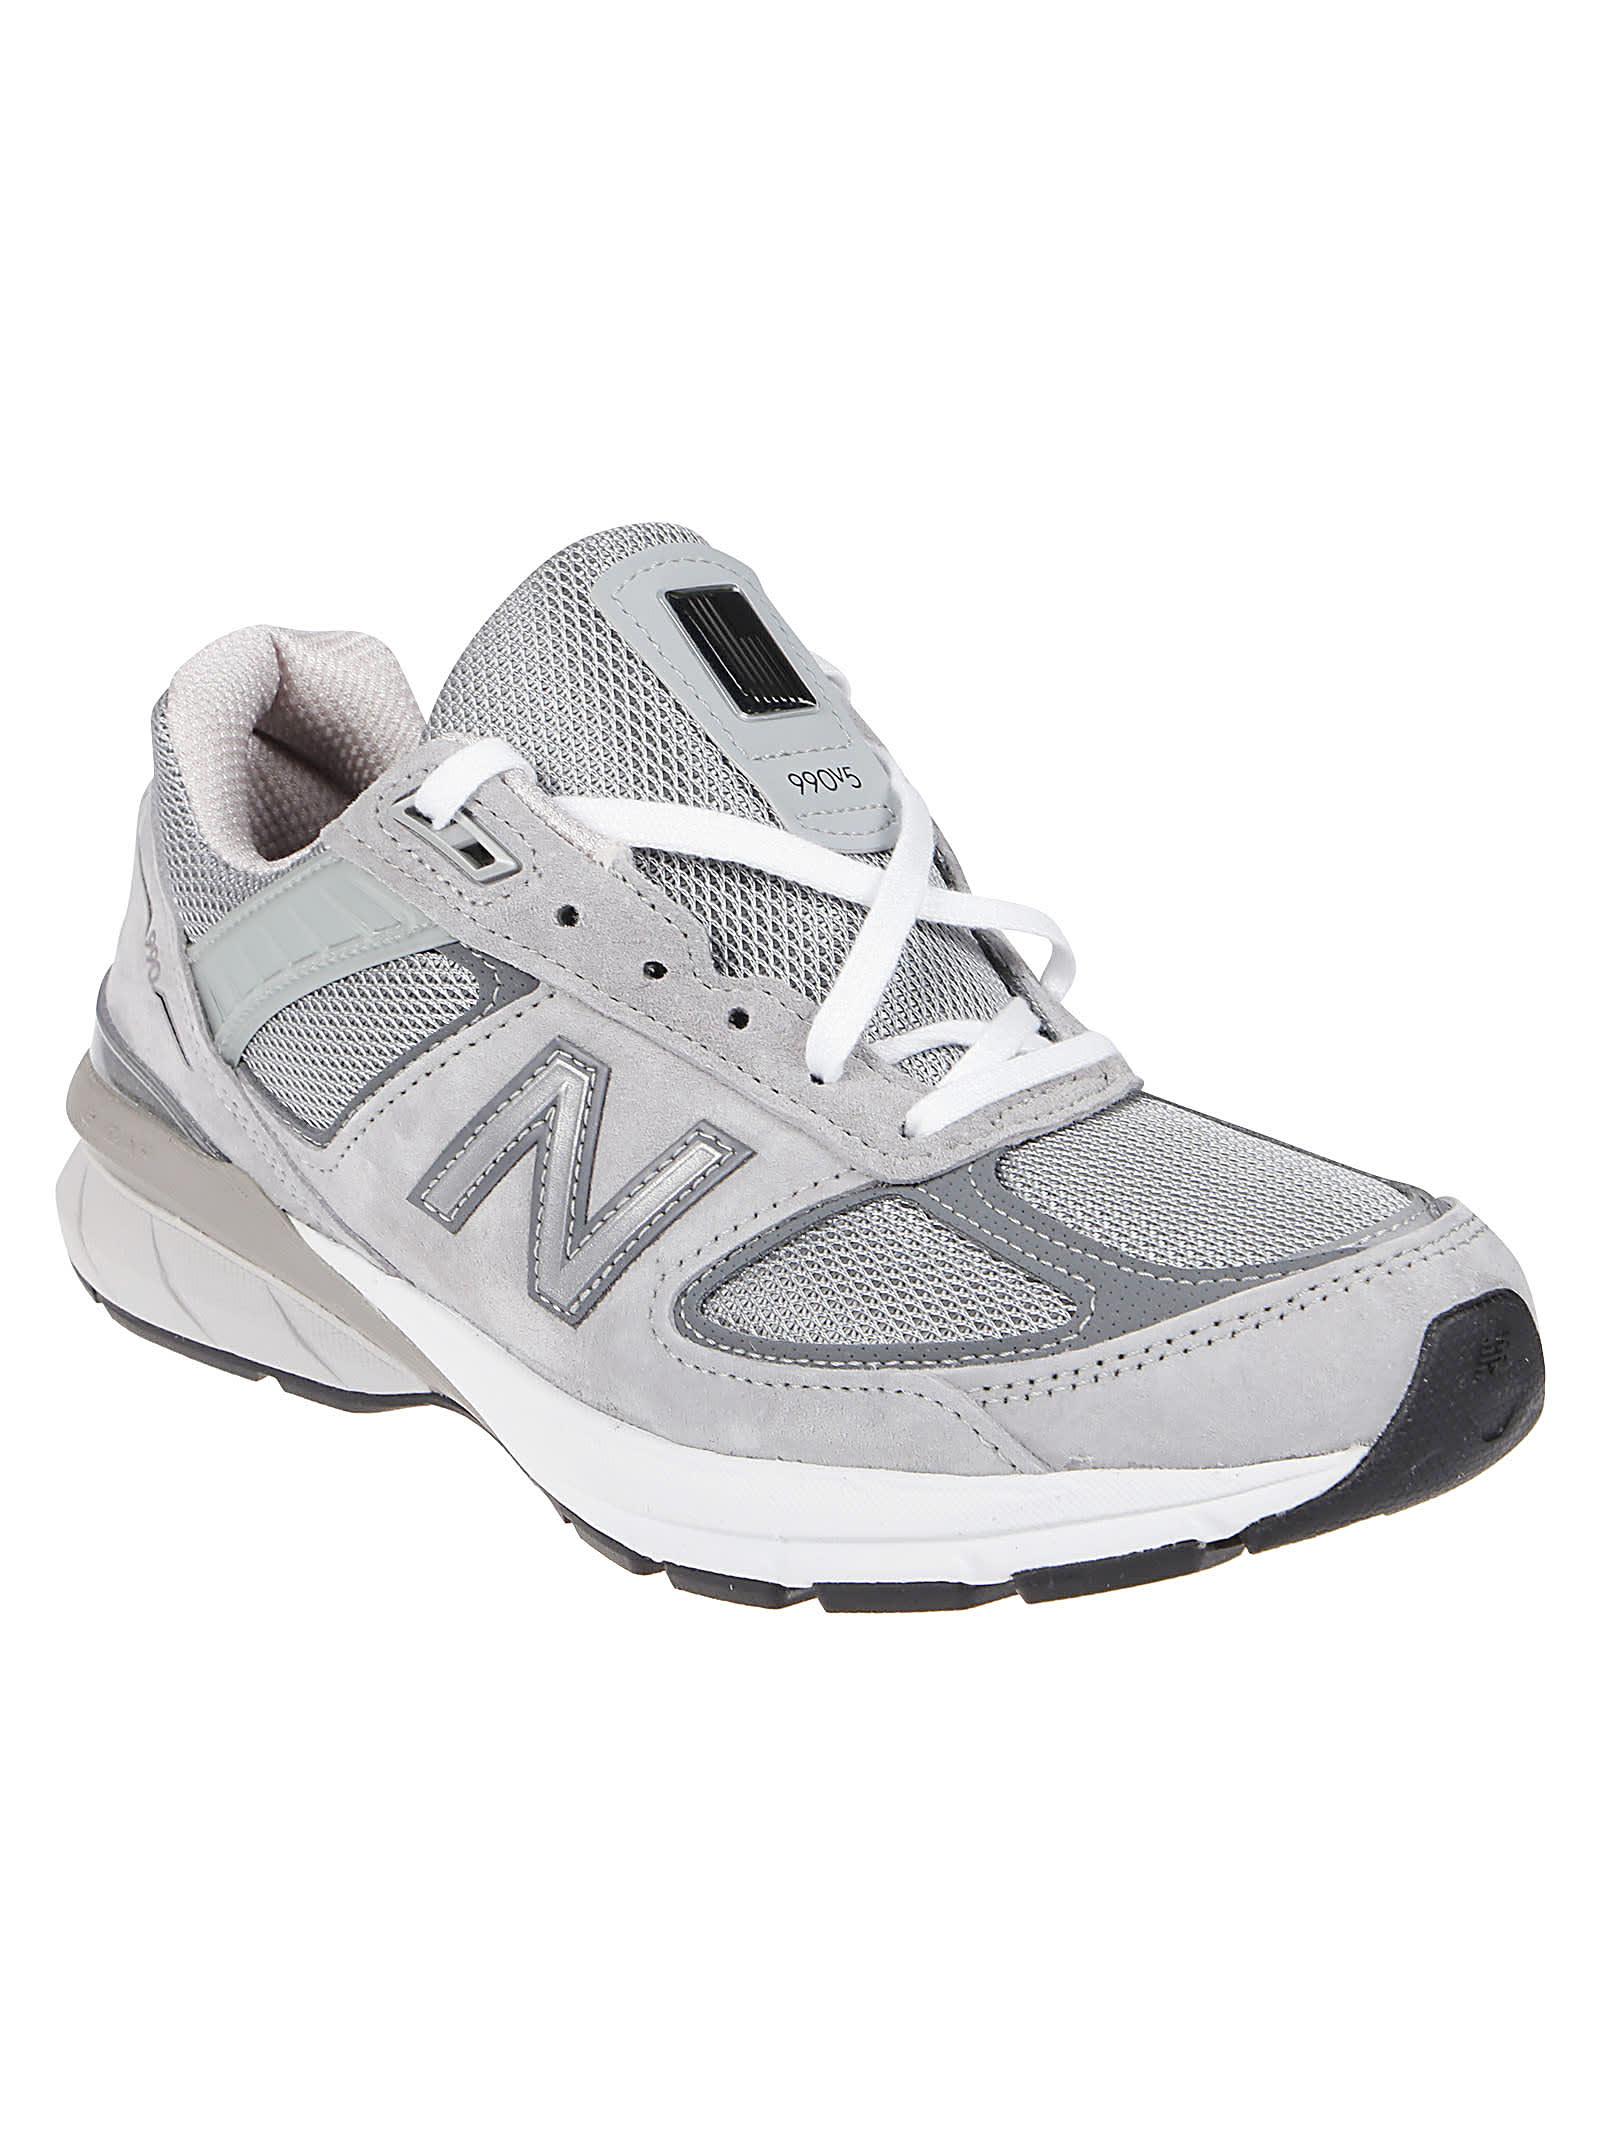 New Balance Sneakers 990v5 Lifestyle in Dark Grey (Gray) for Men - Lyst